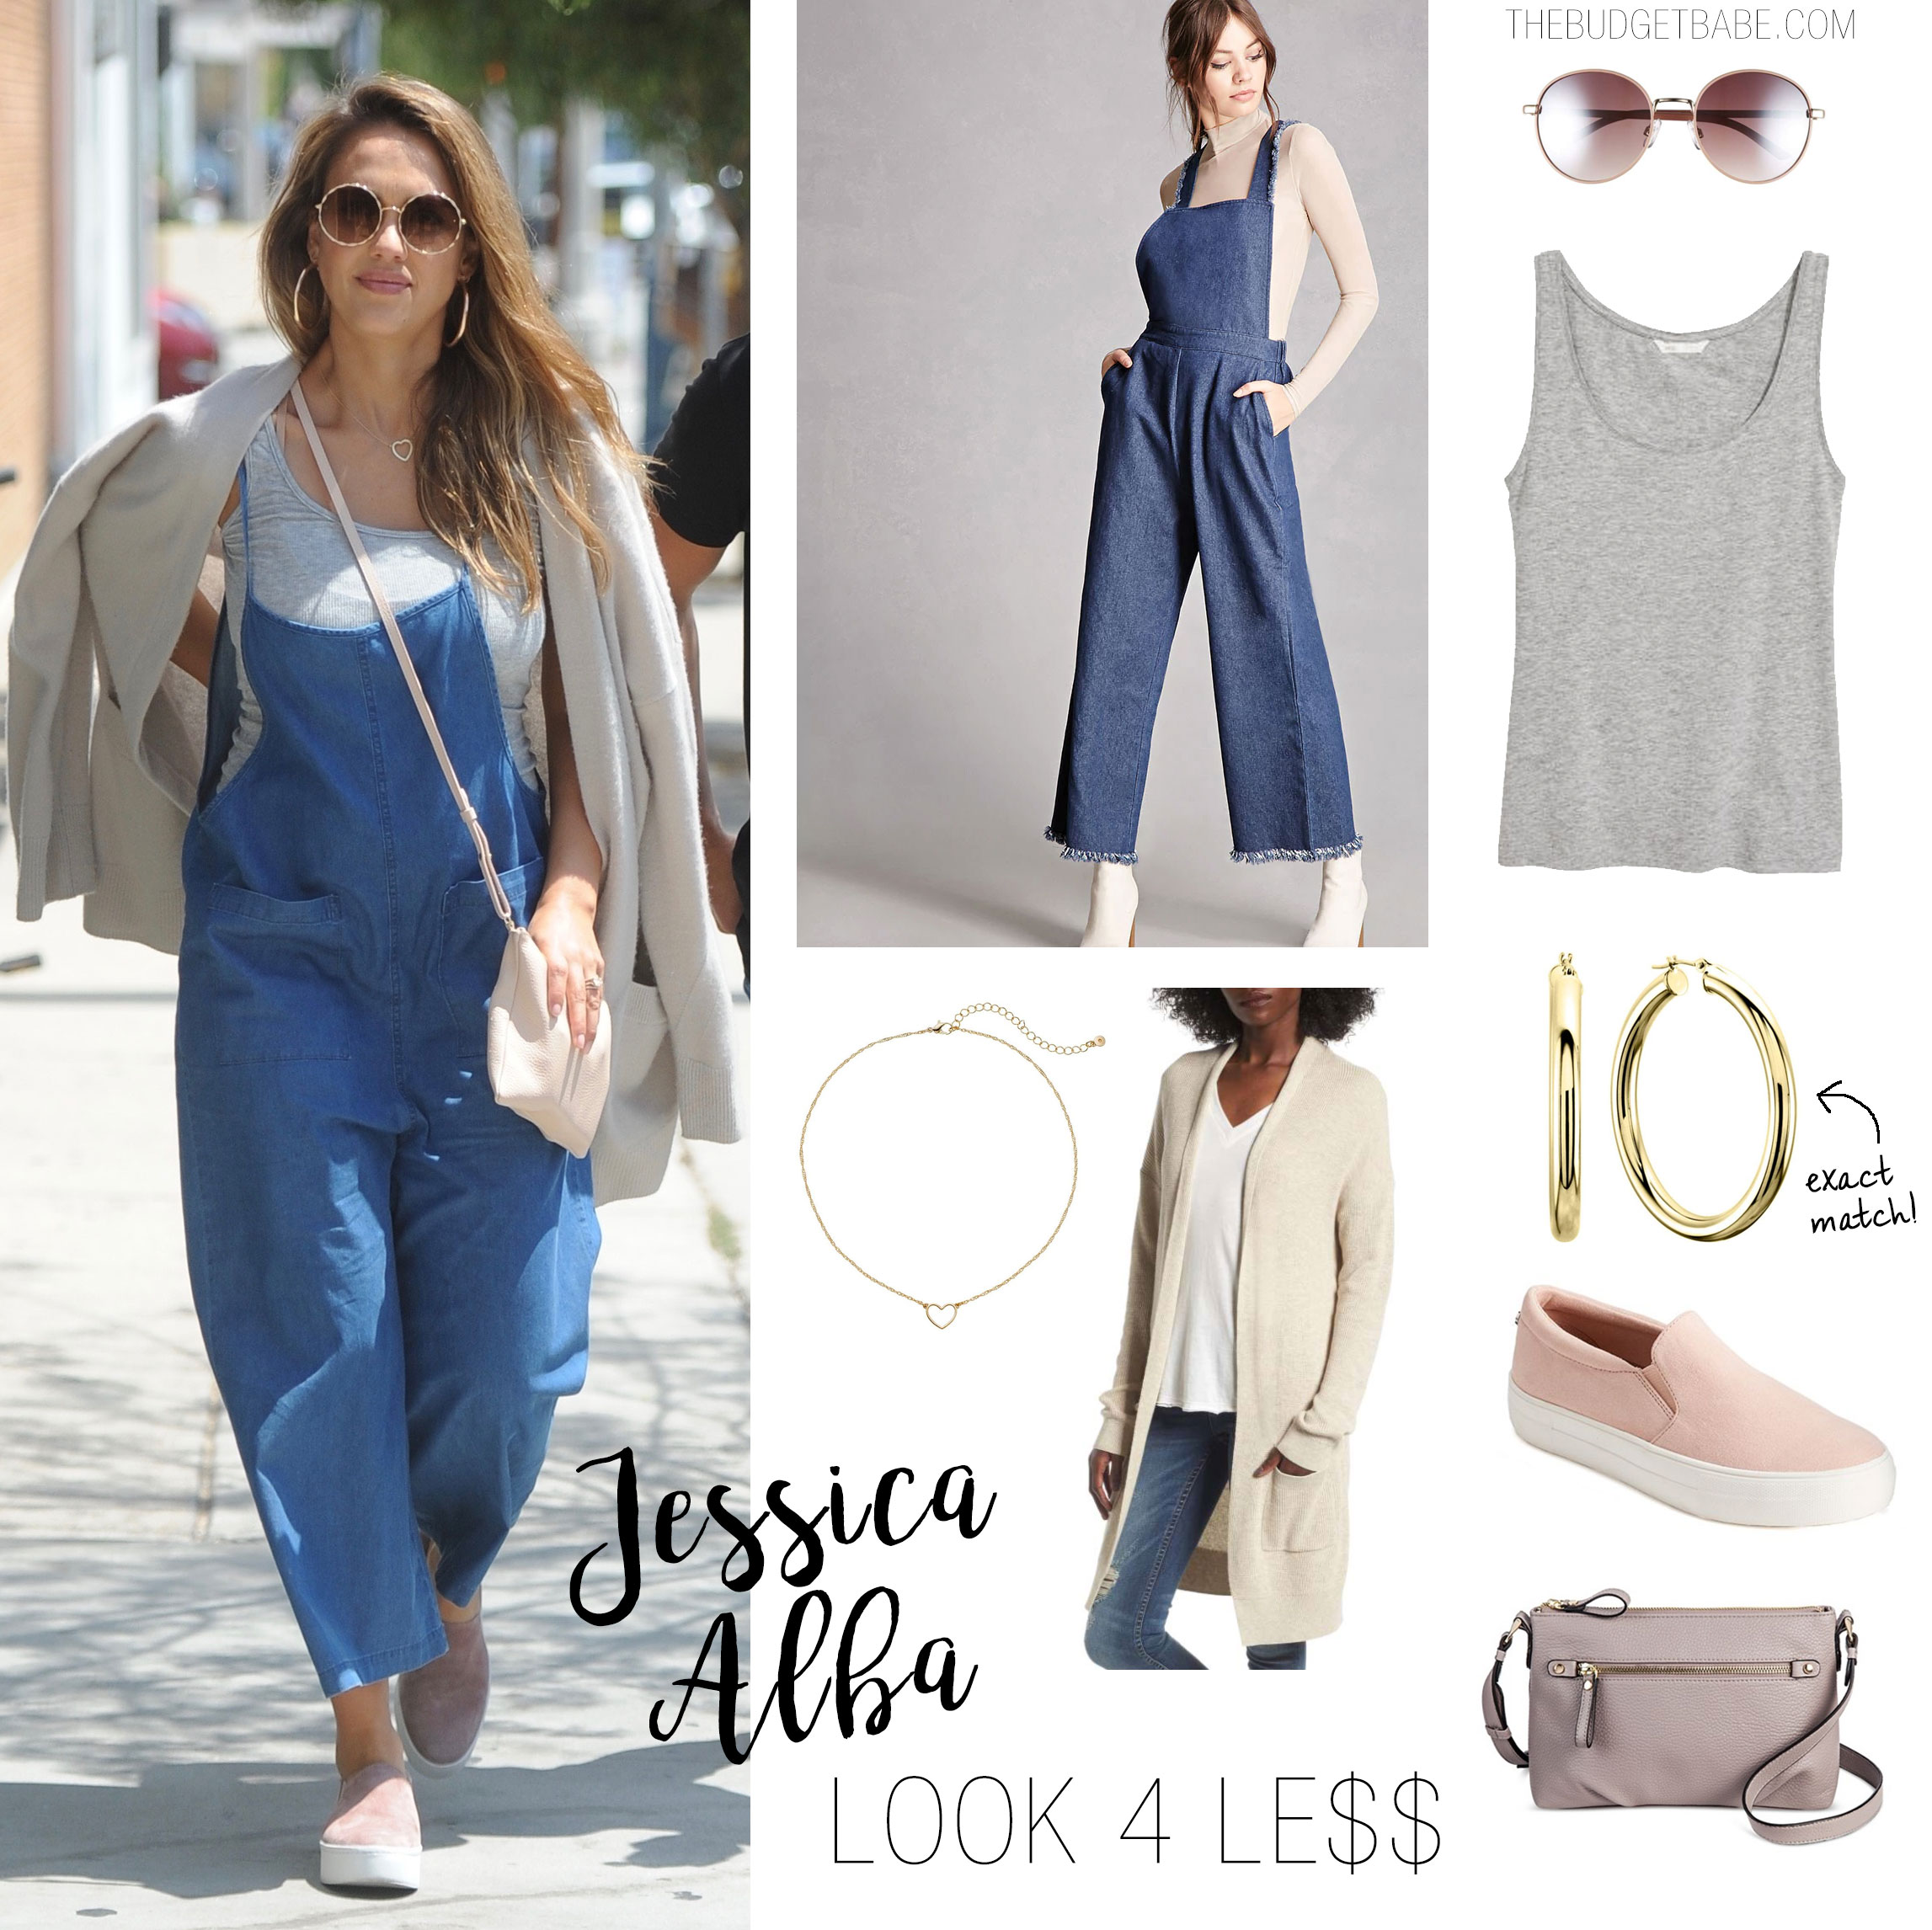 Jessica Alba looks cute in chambray overalls and blush slip on sneakers